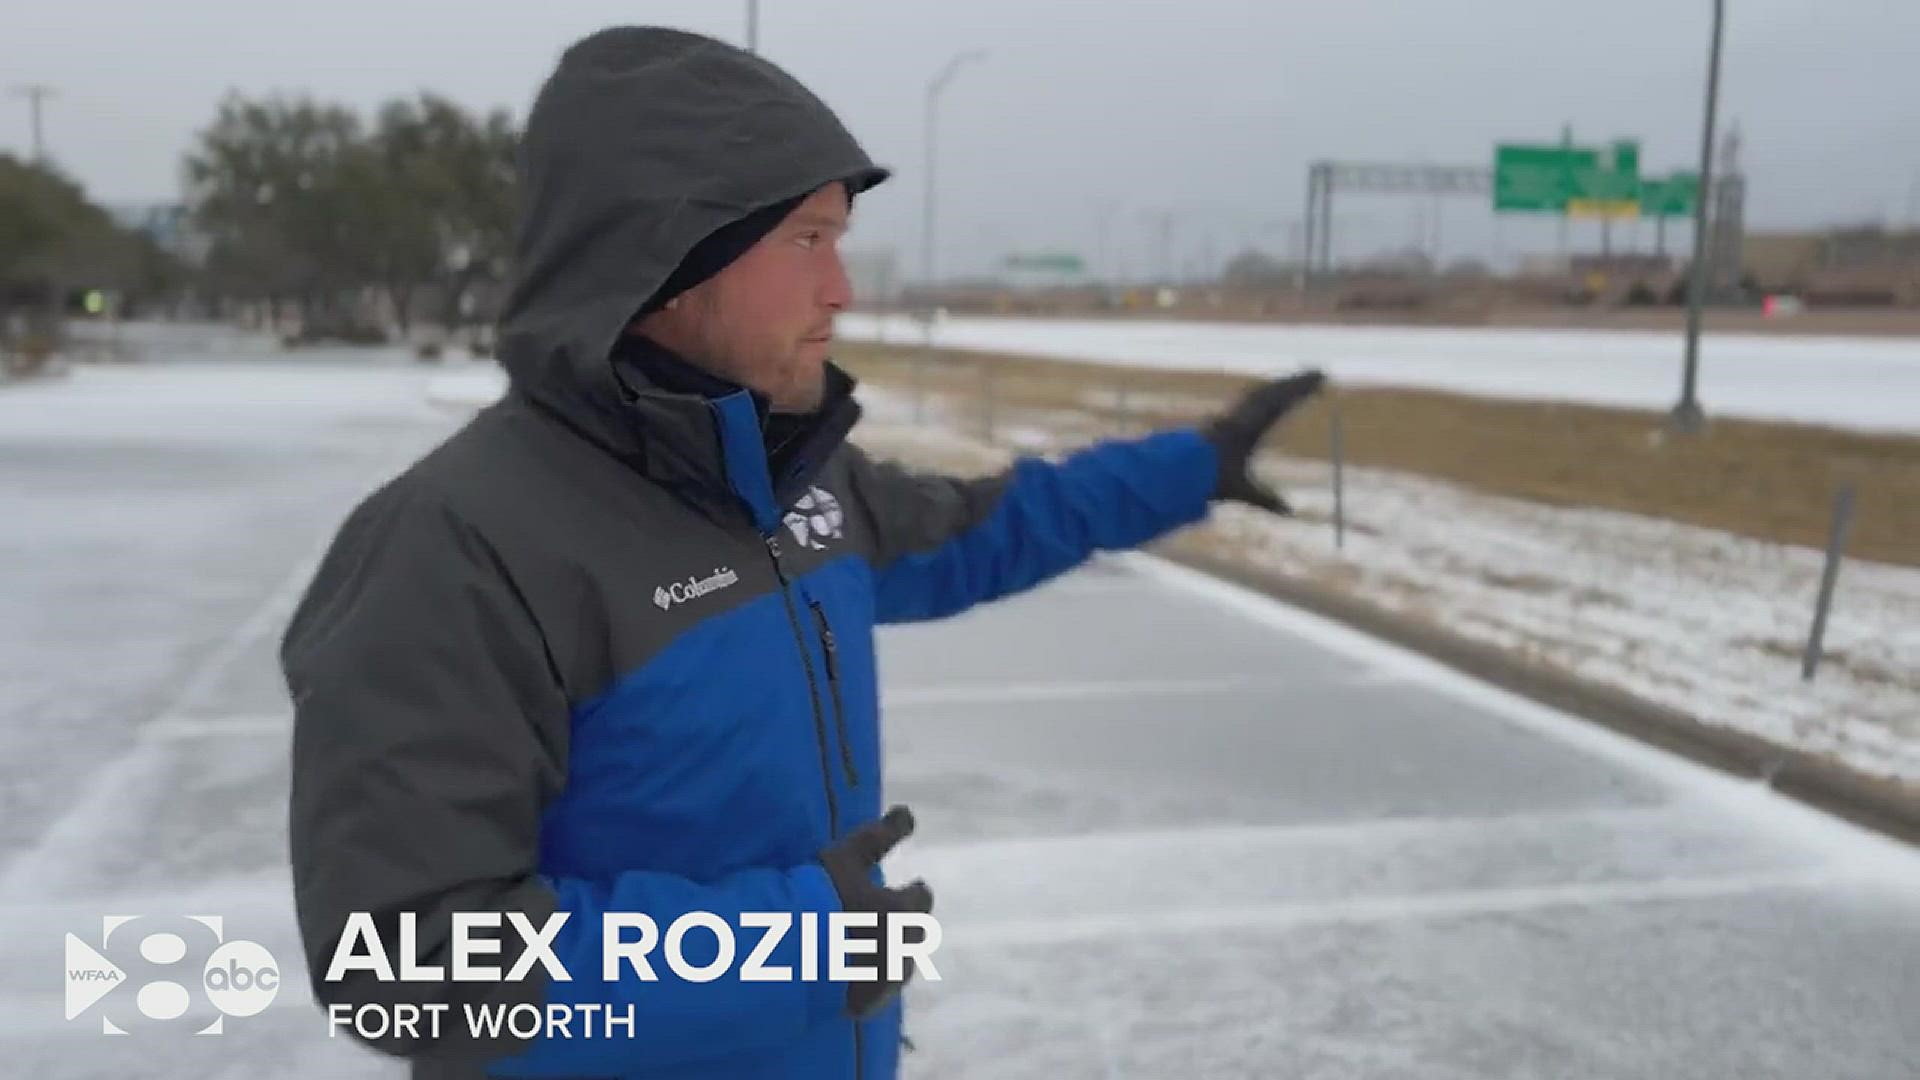 Snow and sleet was falling across North Texas on Thursday morning. Here's what WFAA reporters saw across the area.